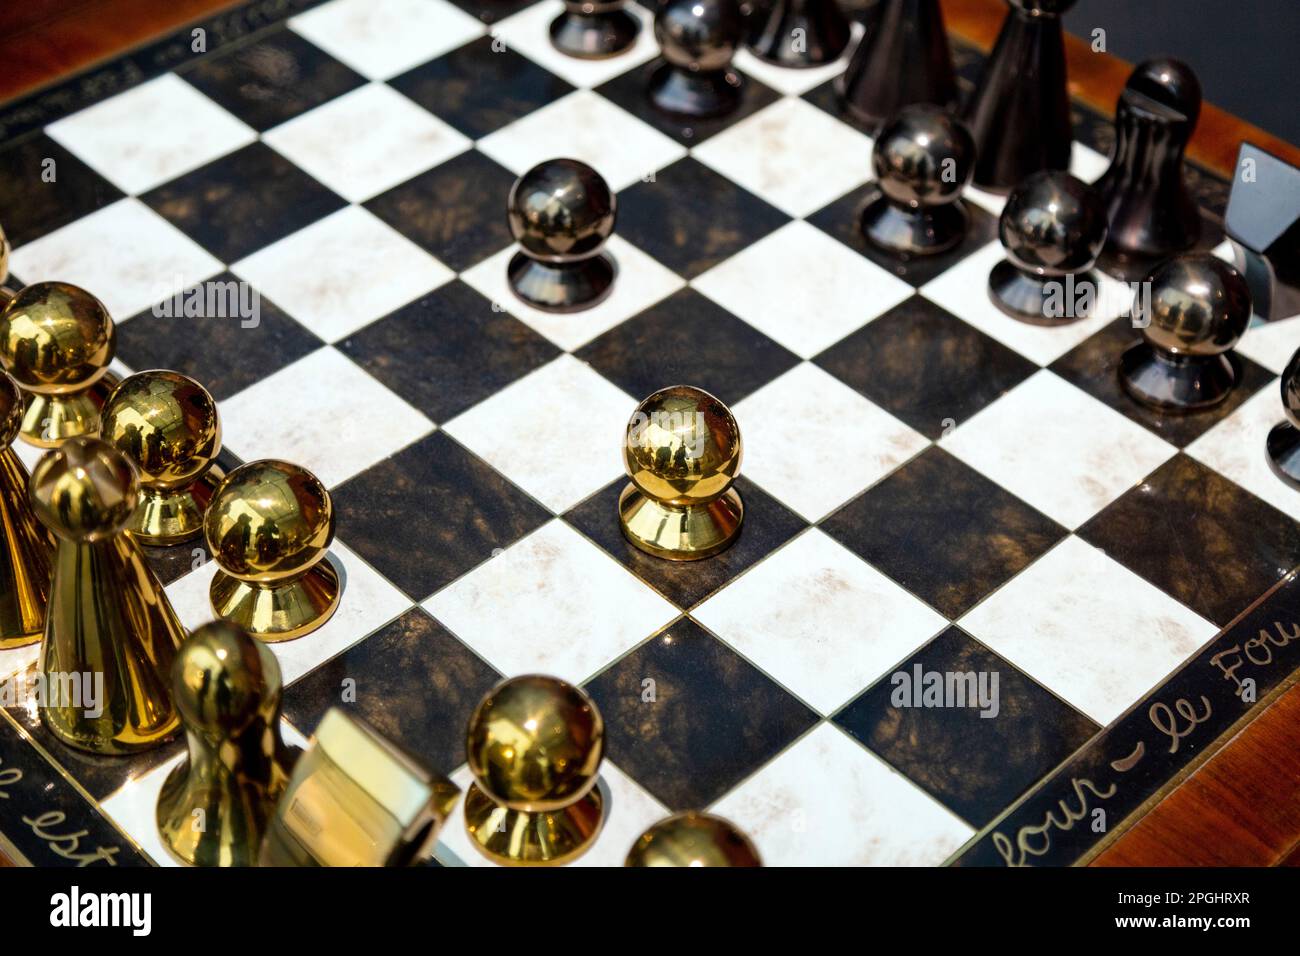 Close-up of Man Ray chess set with metallic gold and graphite pawns at Frieze Masters 2018, London, UK Stock Photo